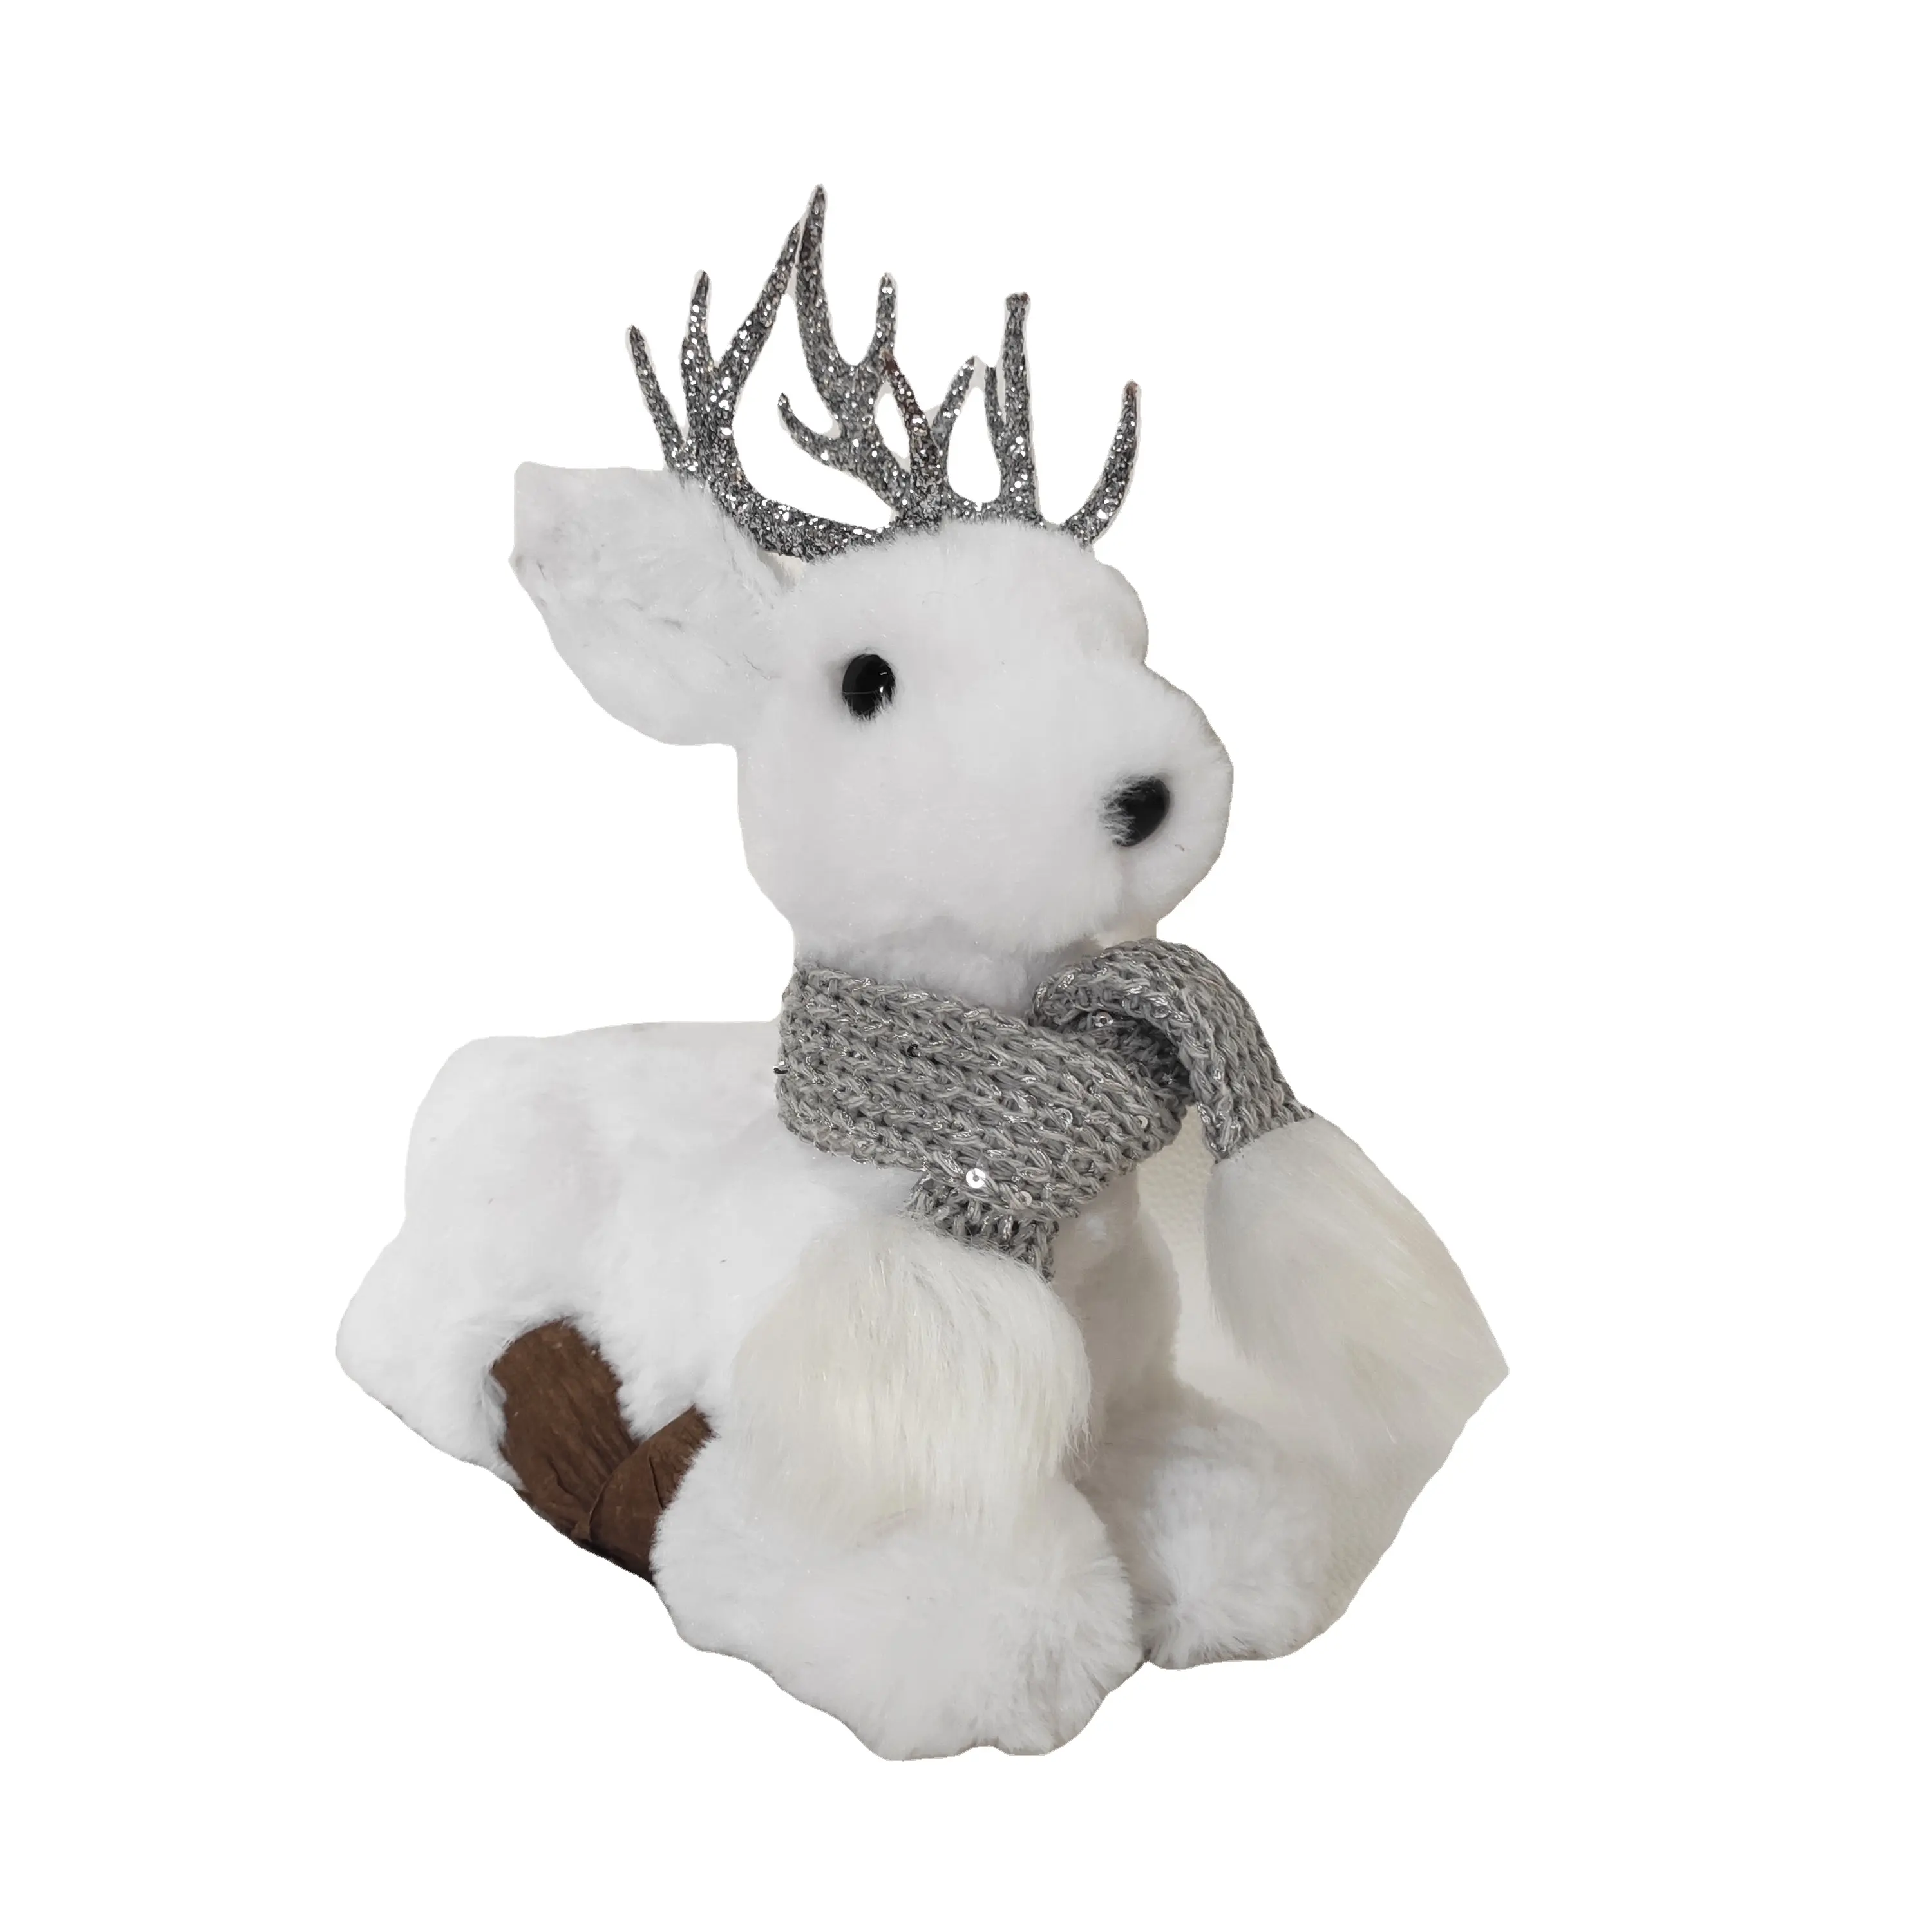 Shiny silver horn white plush lying down deer for holiday celebration decorations